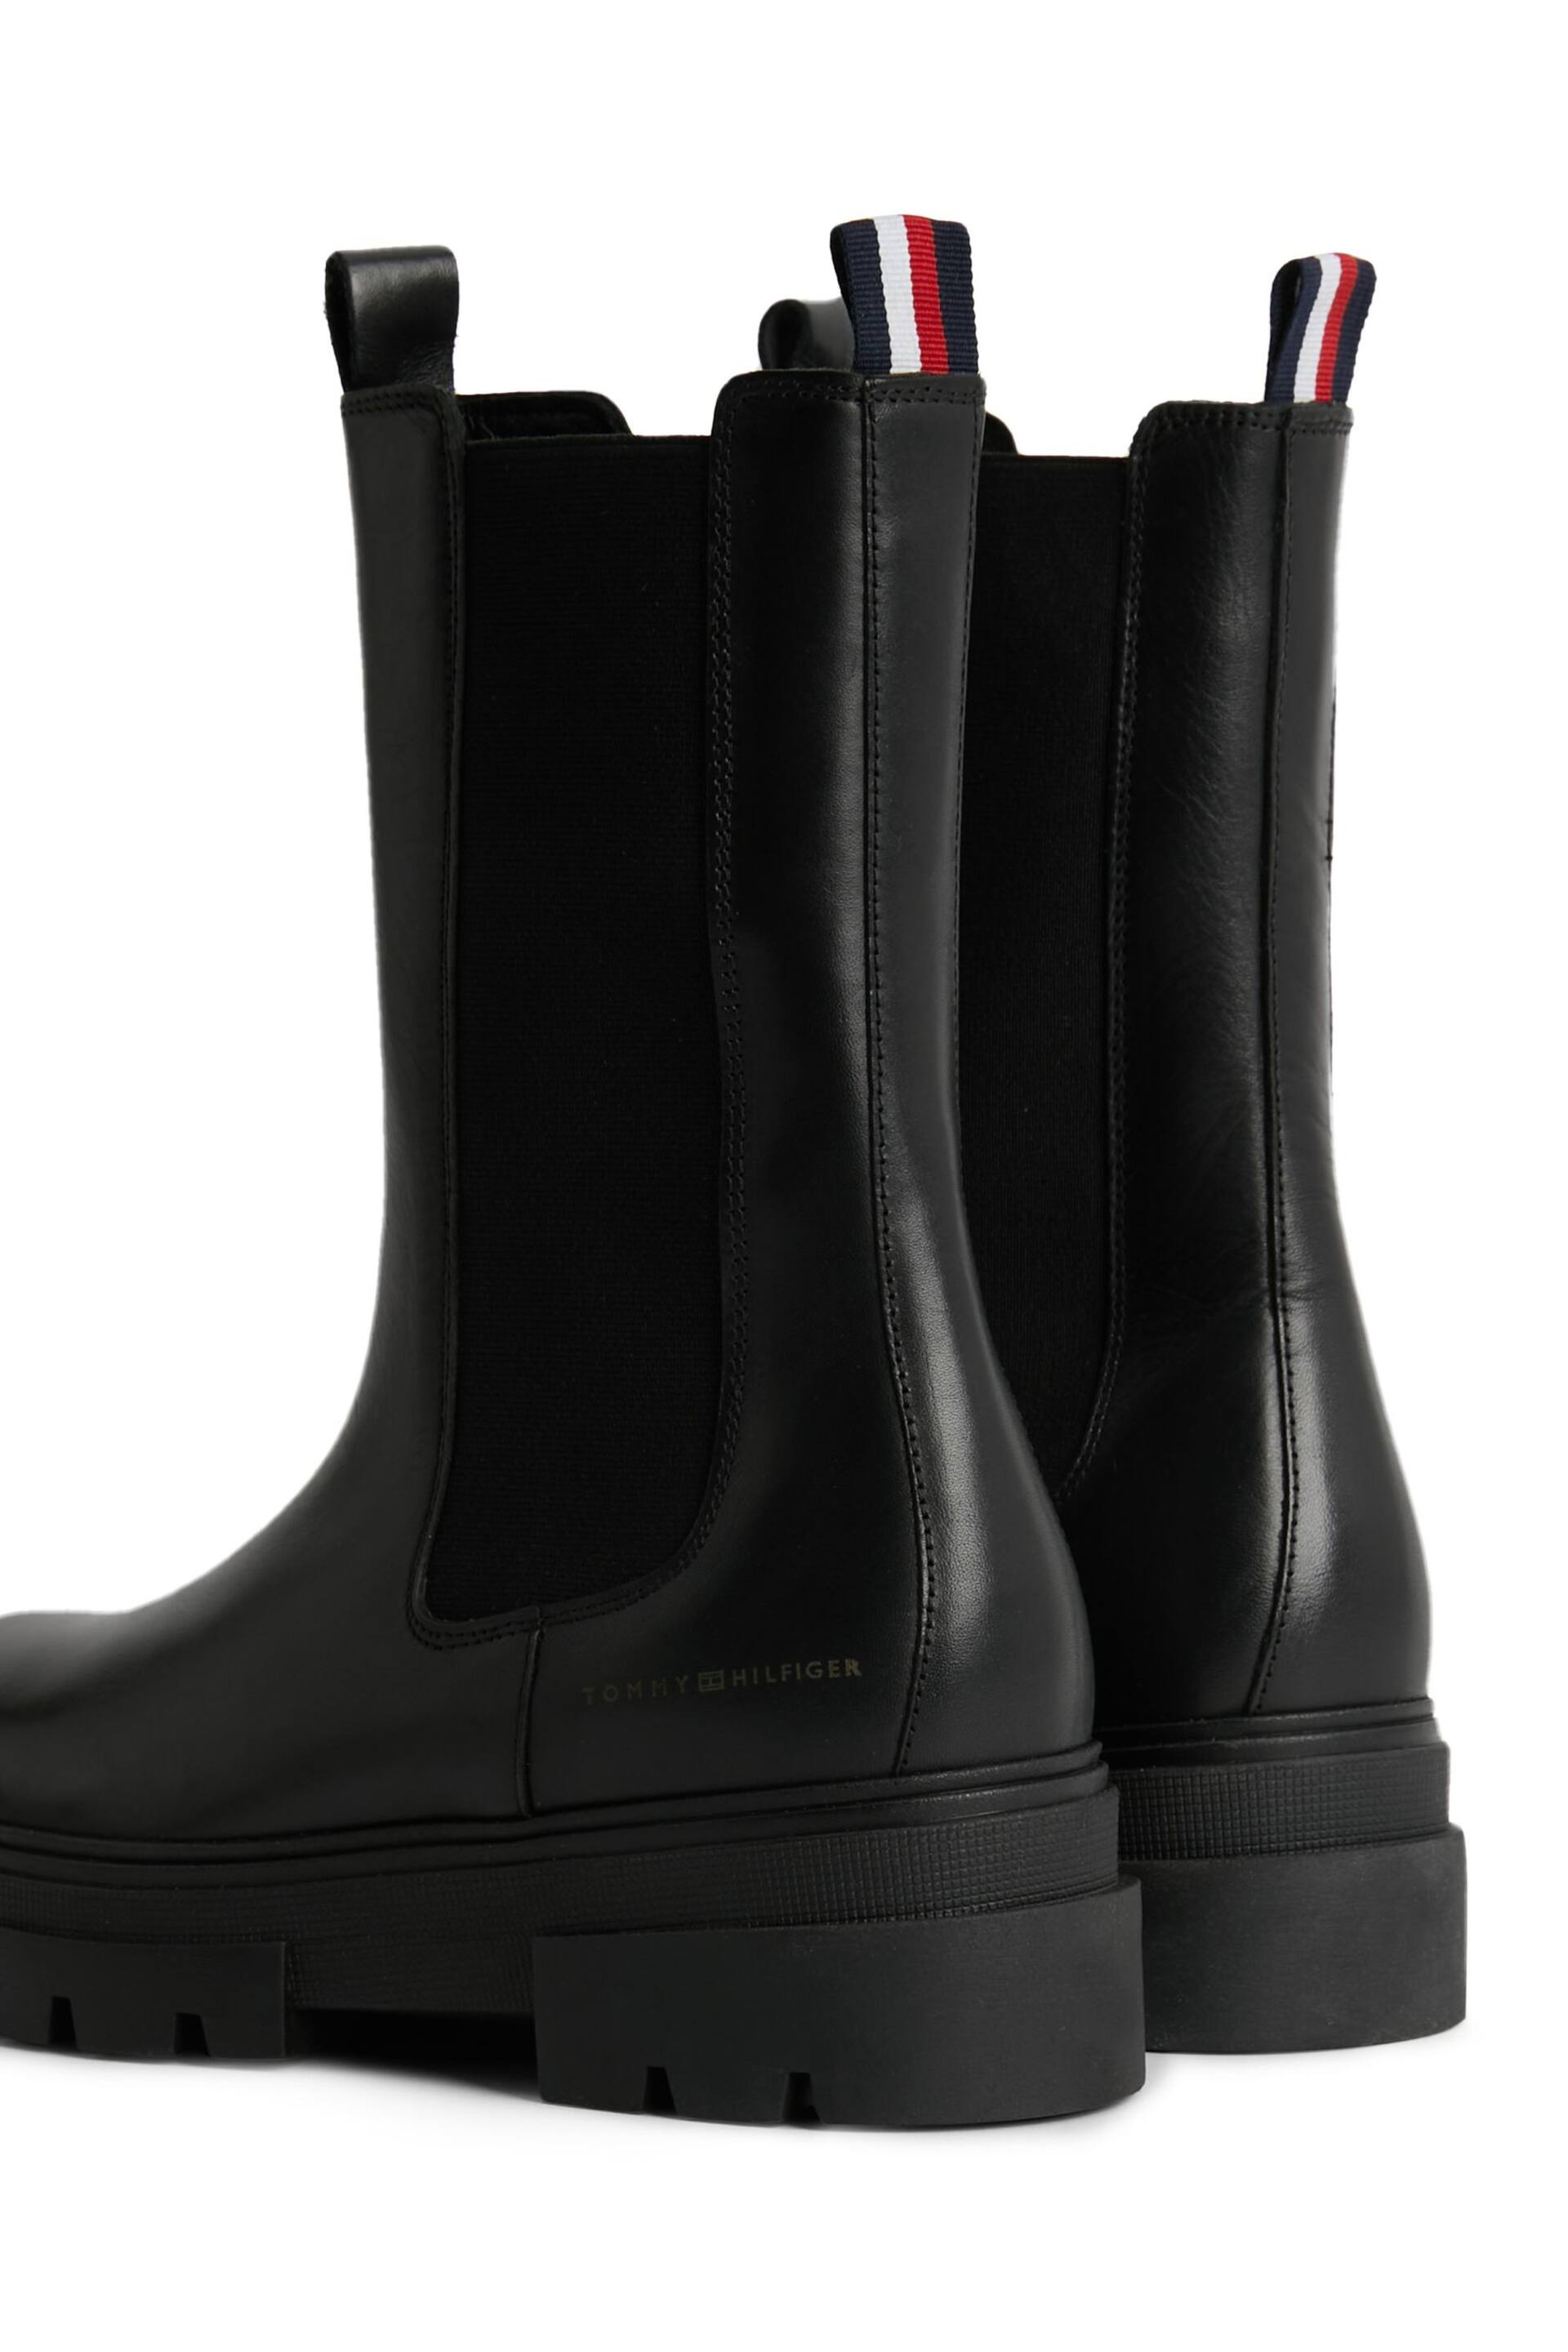 Tommy Hilfiger High Rise Chelsea Black Boots - Image 5 of 6